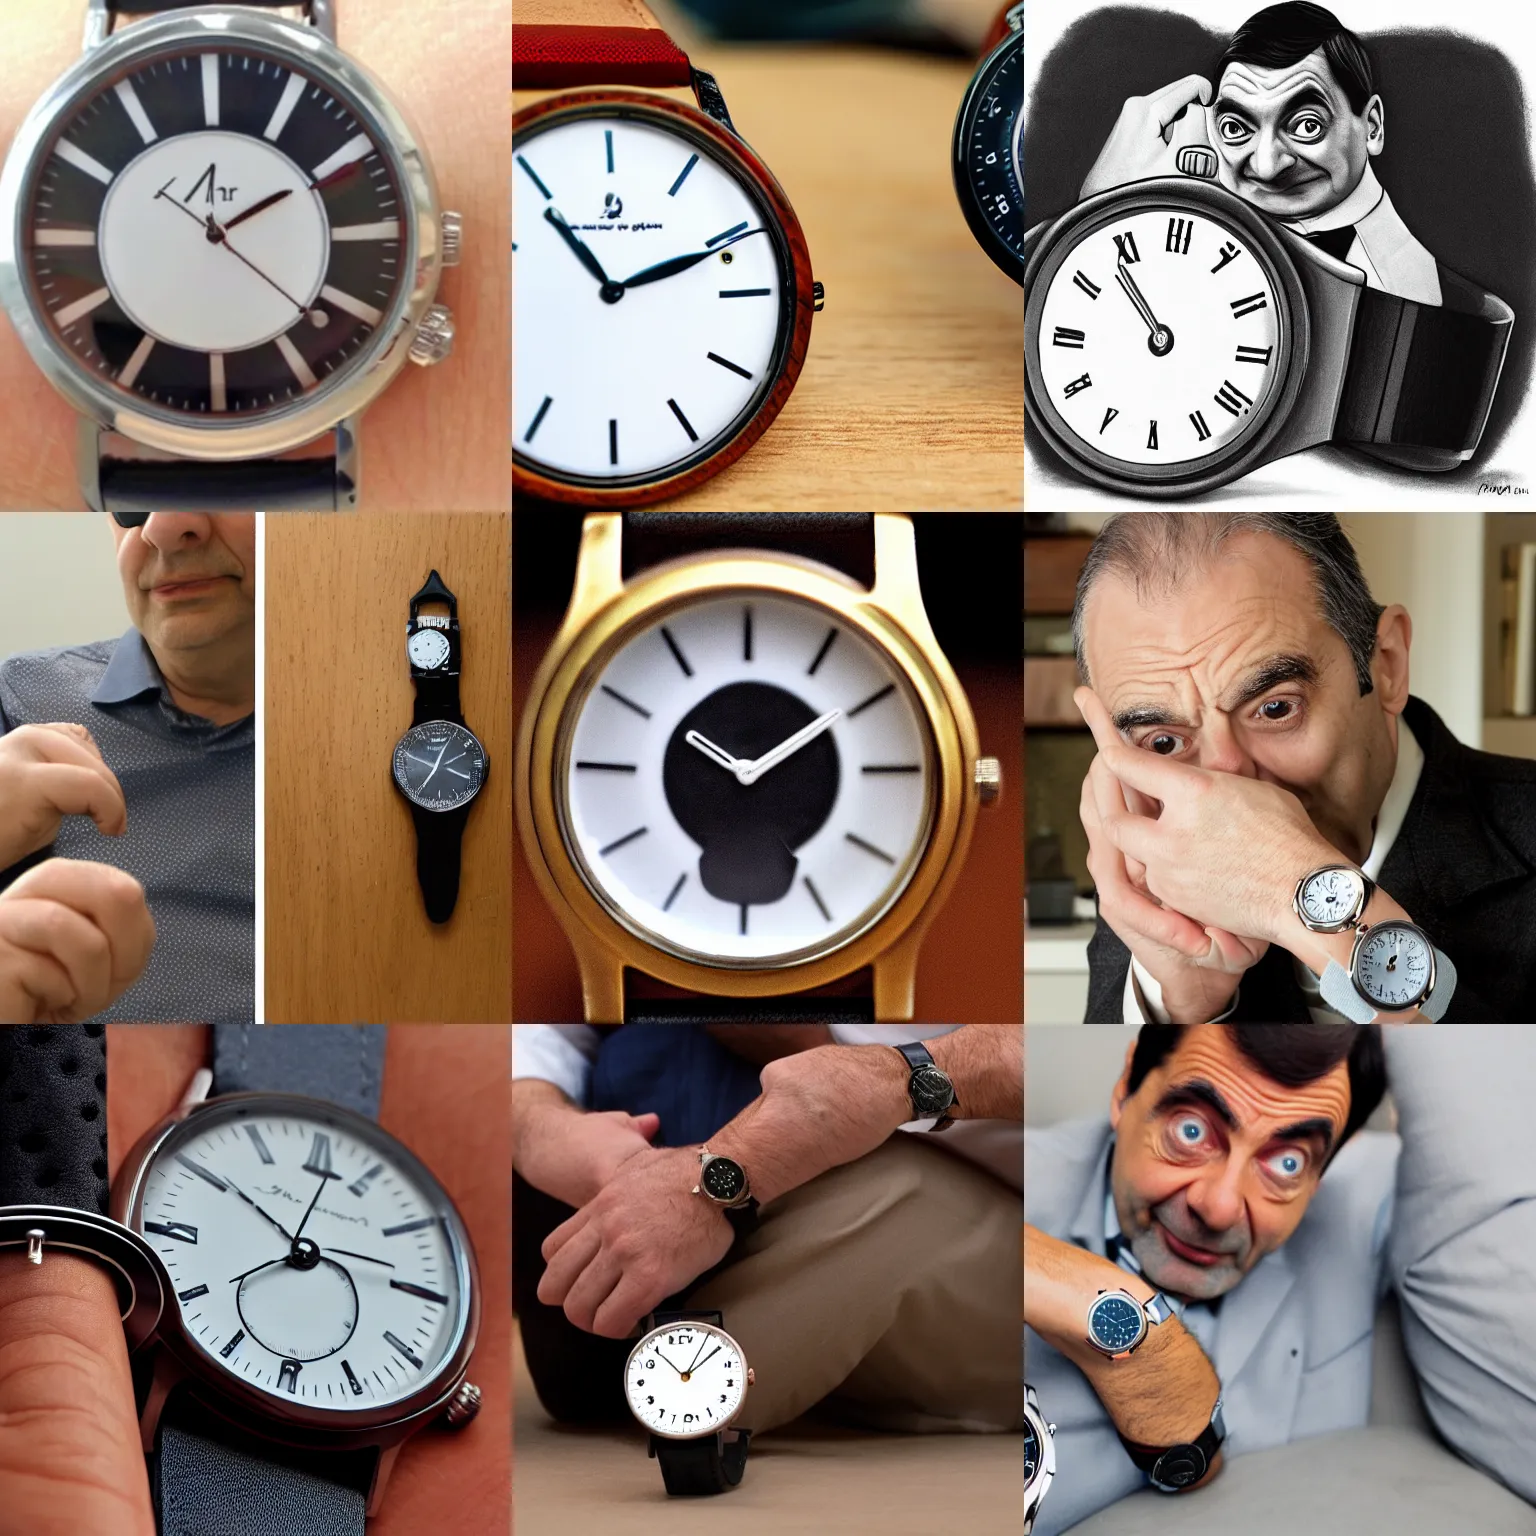 Prompt: Mr. Bean waiting impatiently looking at his watch